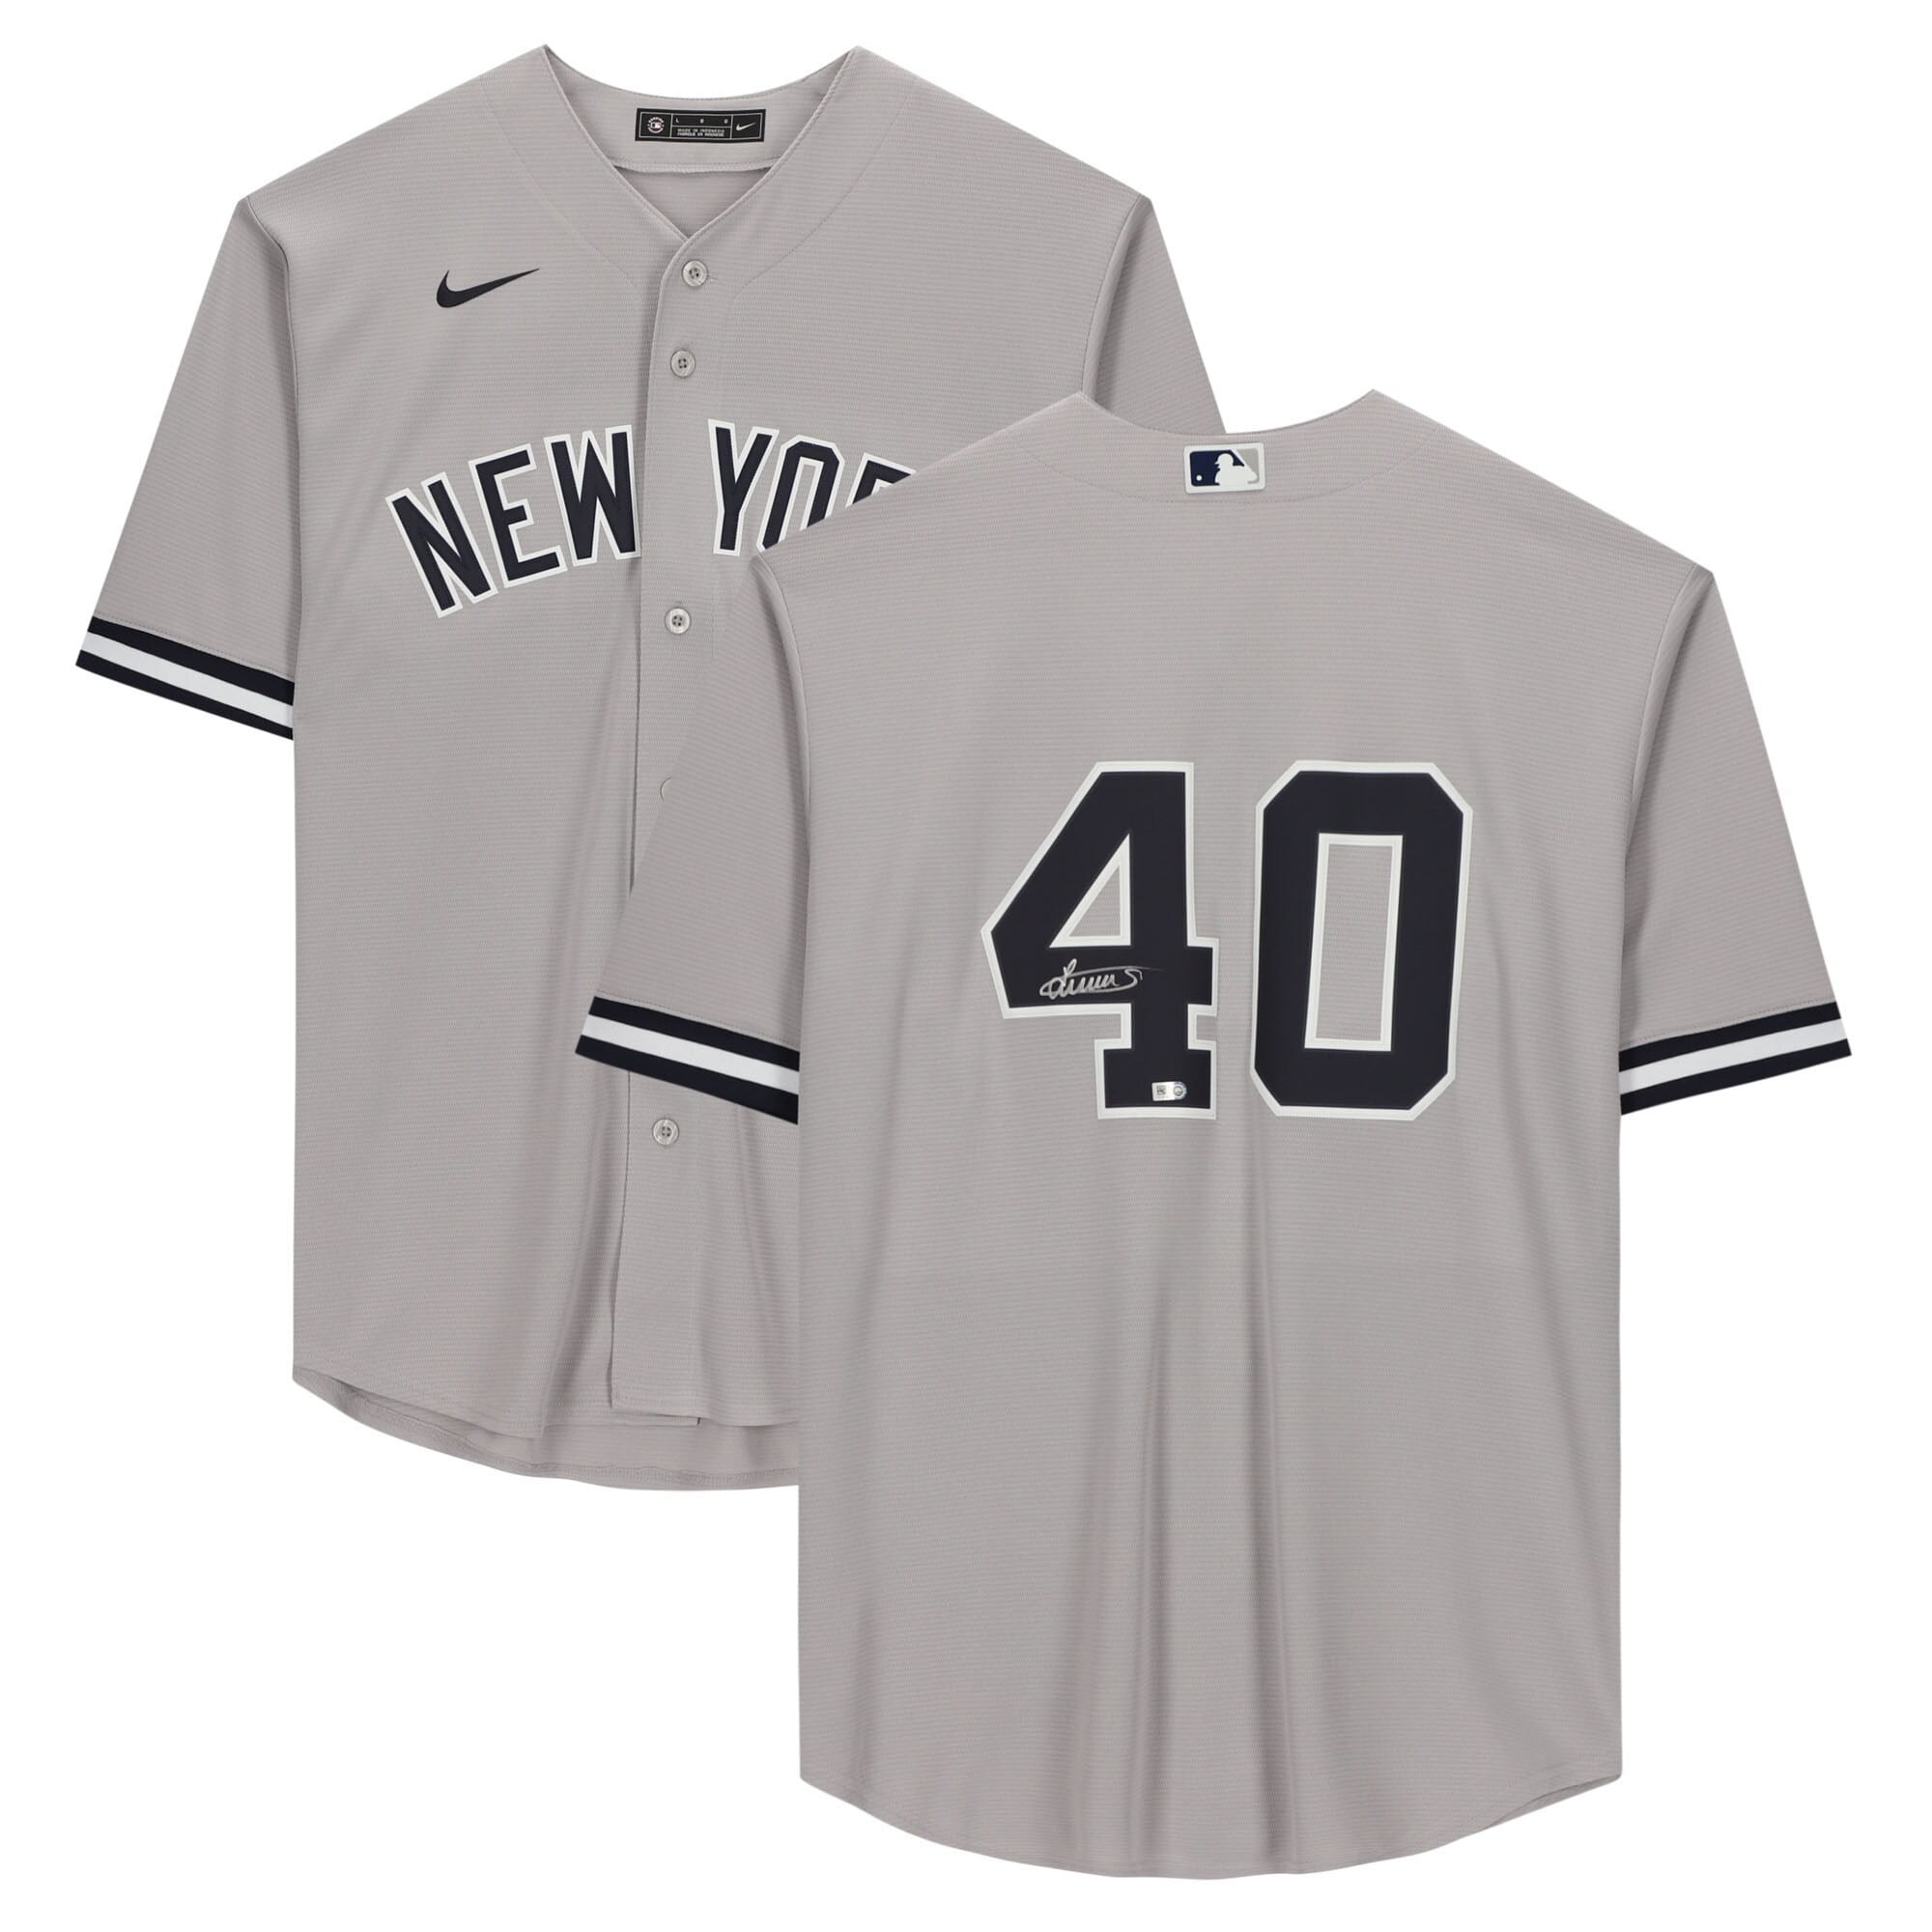 Youth Nike Mickey Mantle White New York Yankees Home Cooperstown Collection  Player Jersey